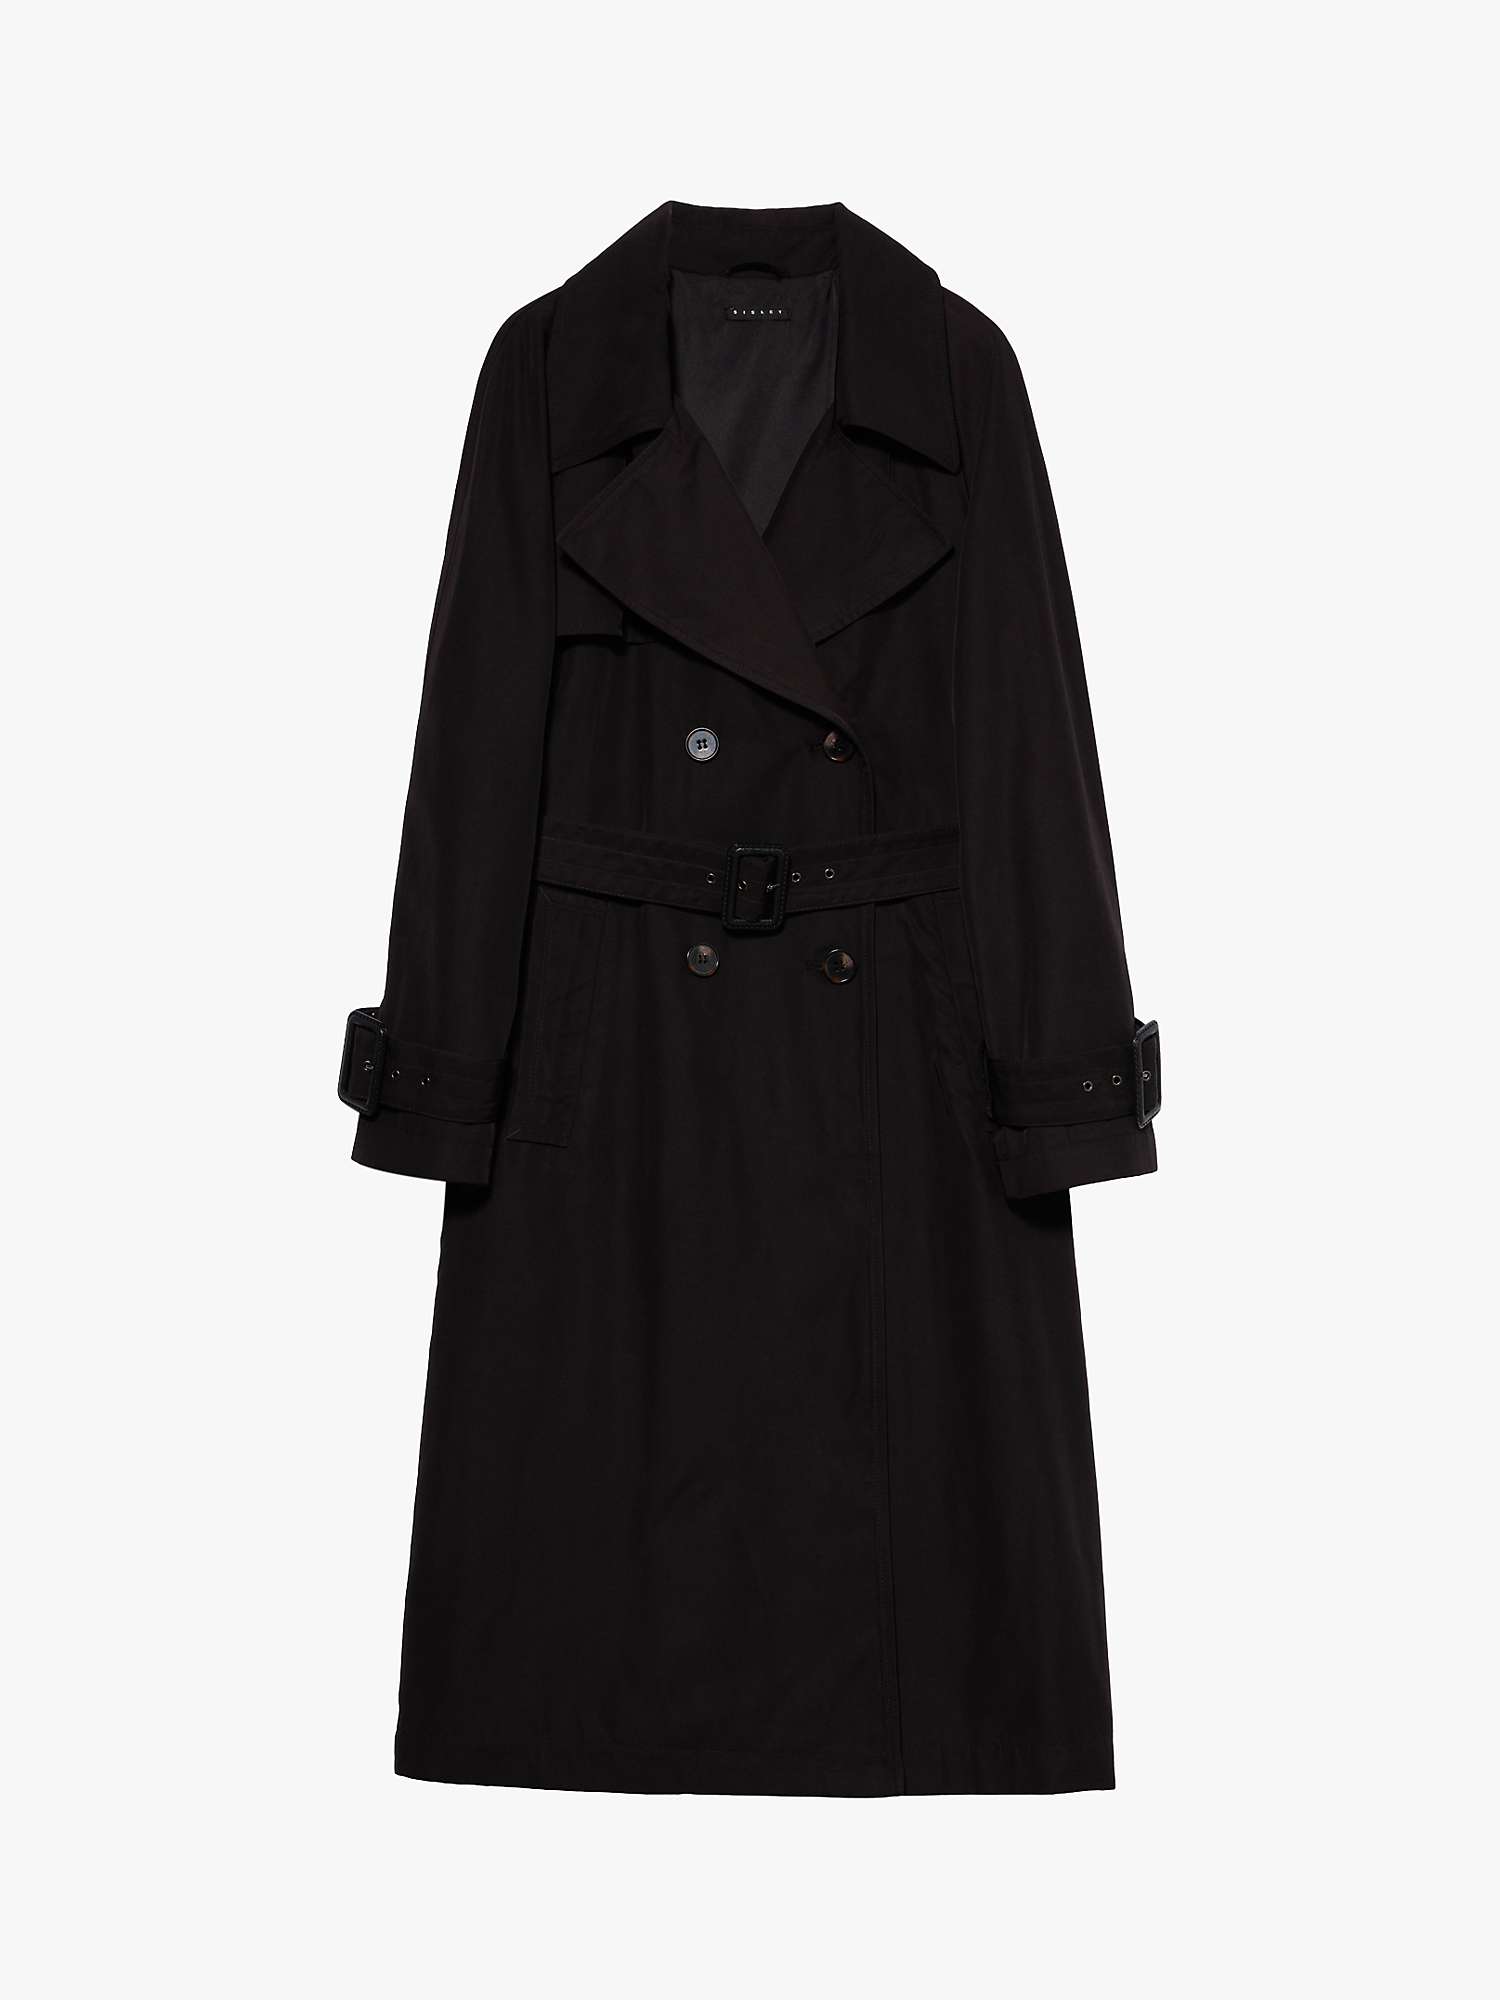 Buy SISLEY Glossy Double Breasted Trench Coat, Black Online at johnlewis.com